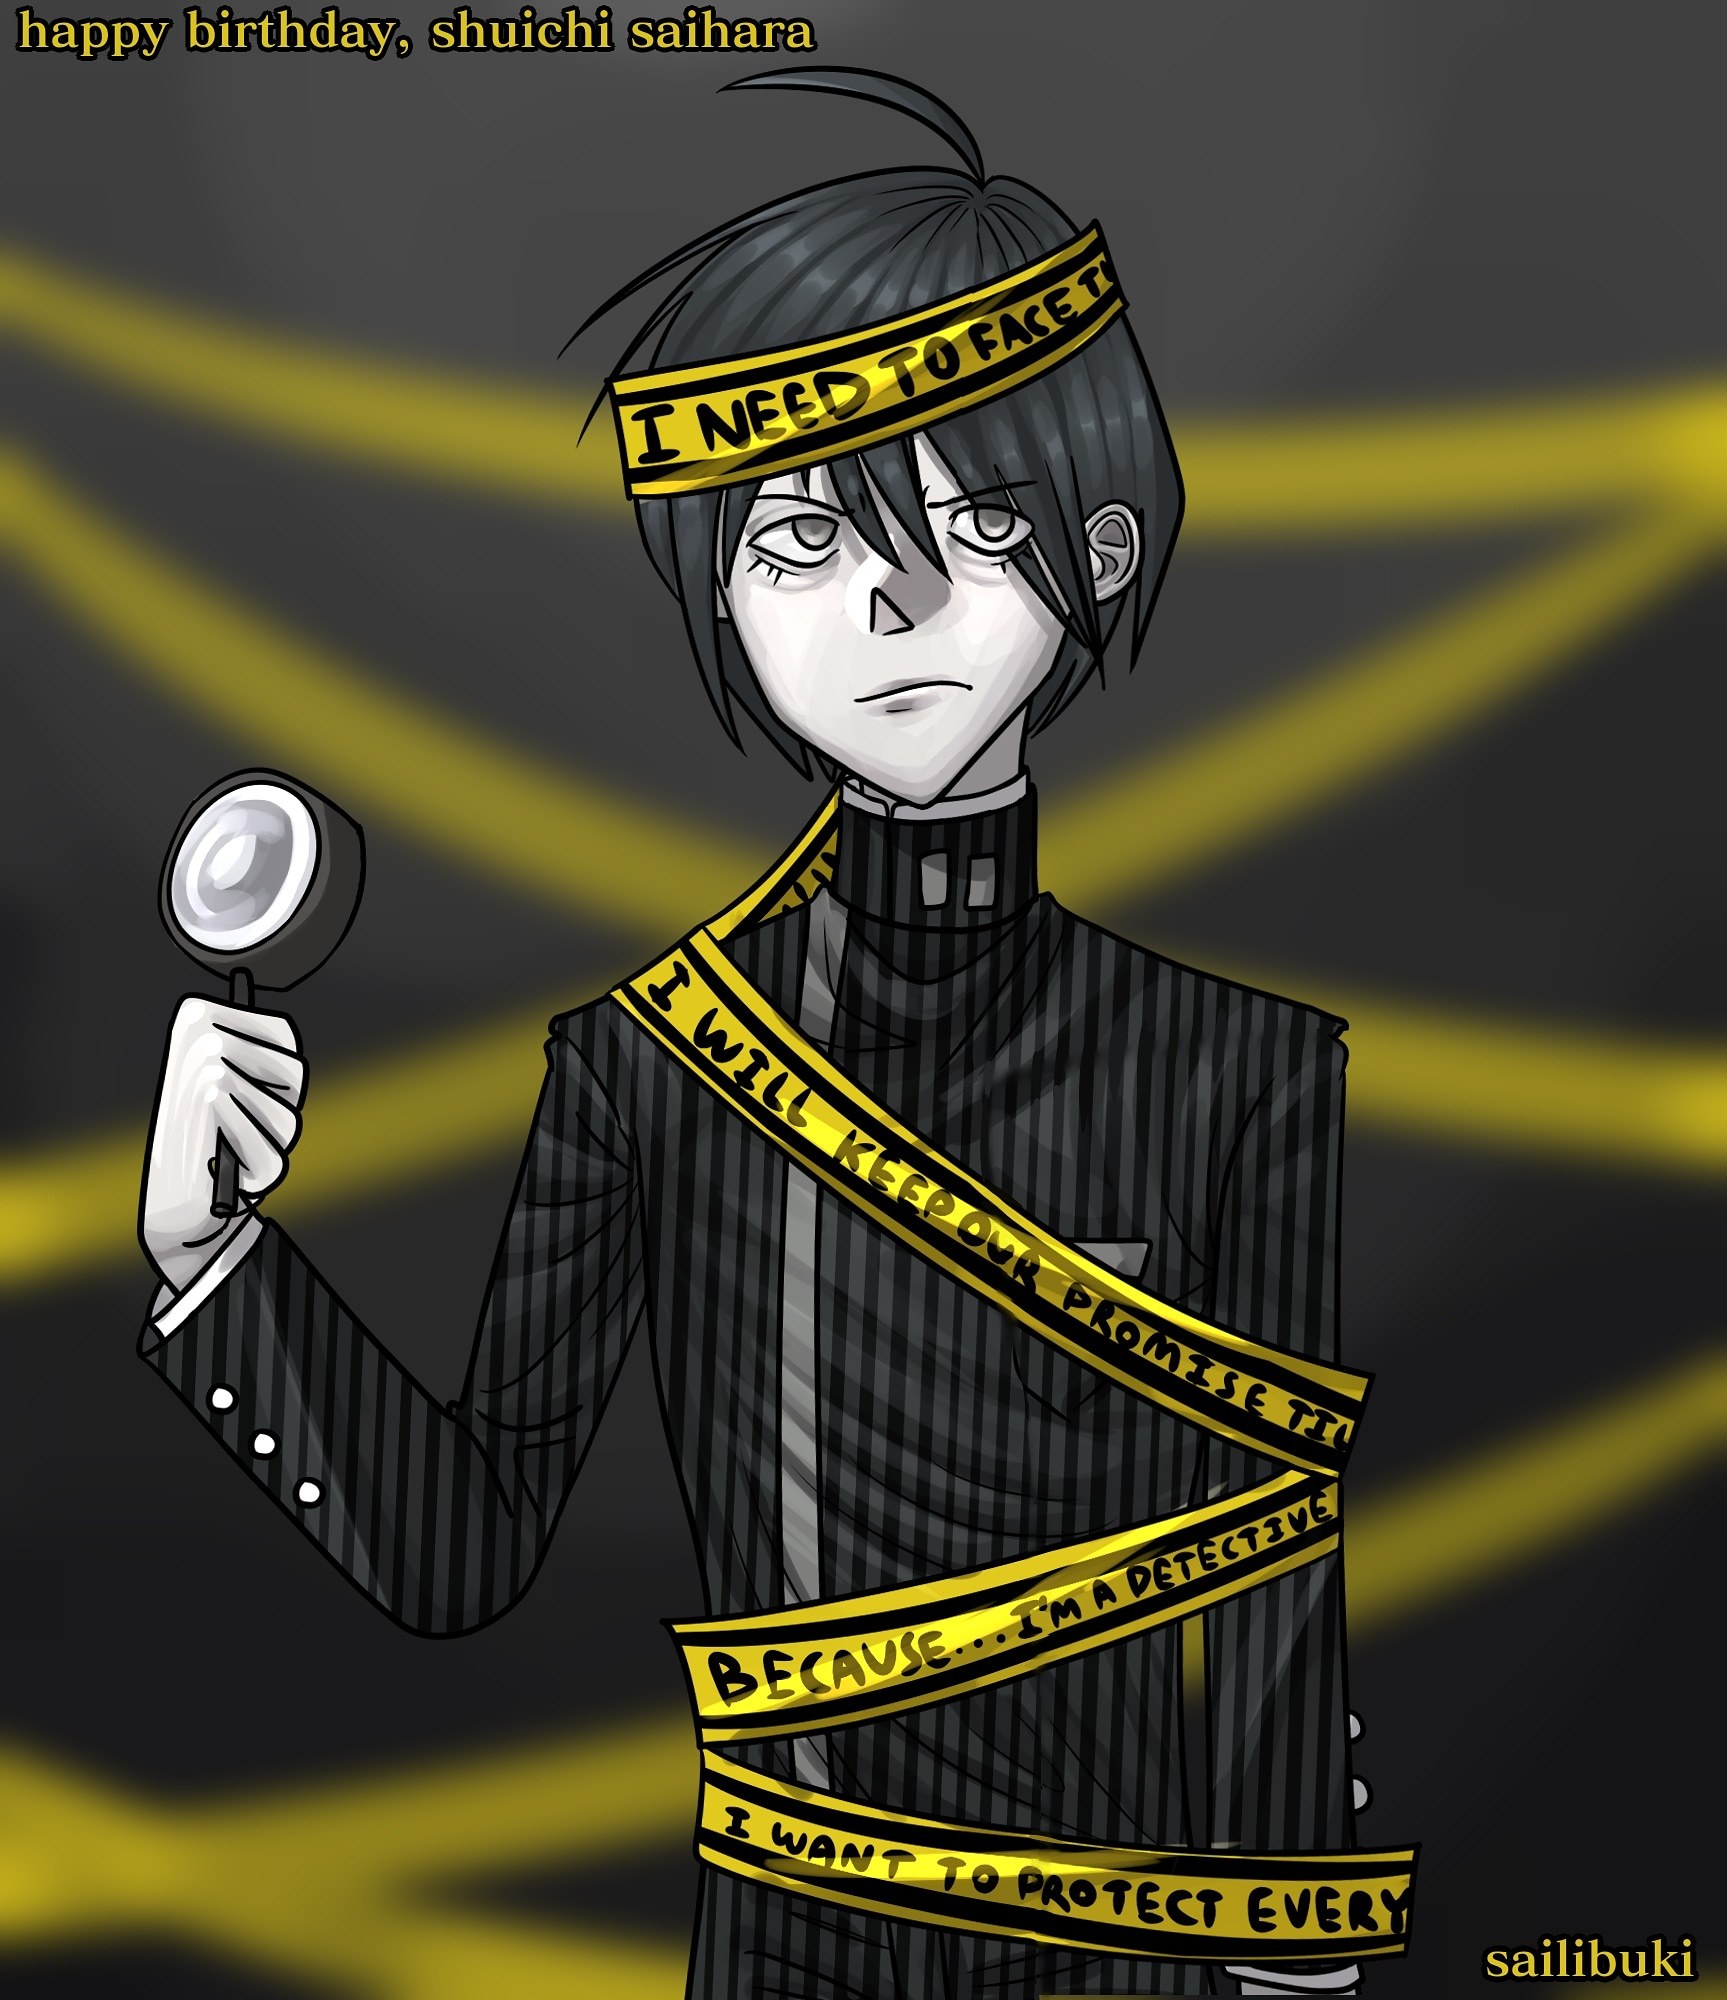 Shuichi Saihara Fanart Tumblr Insert Creative Title Shuichisaihara I Ve Seen Some People Do This So I Thought Why Not Do It Myself